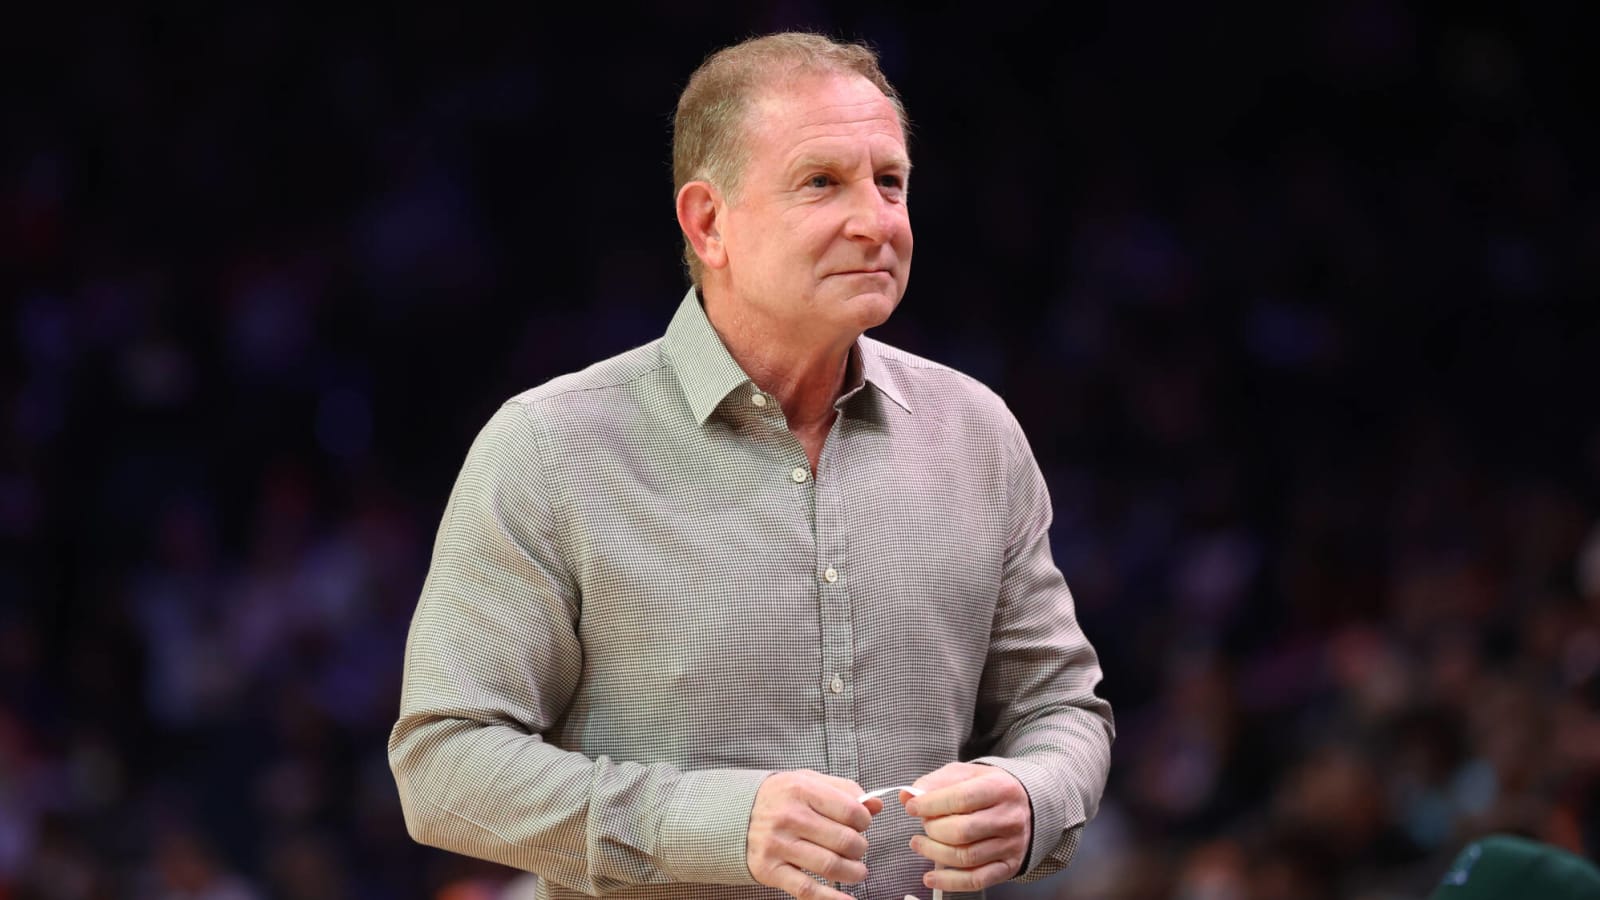 Public pressure mounting on Suns' Sarver to resign or sell